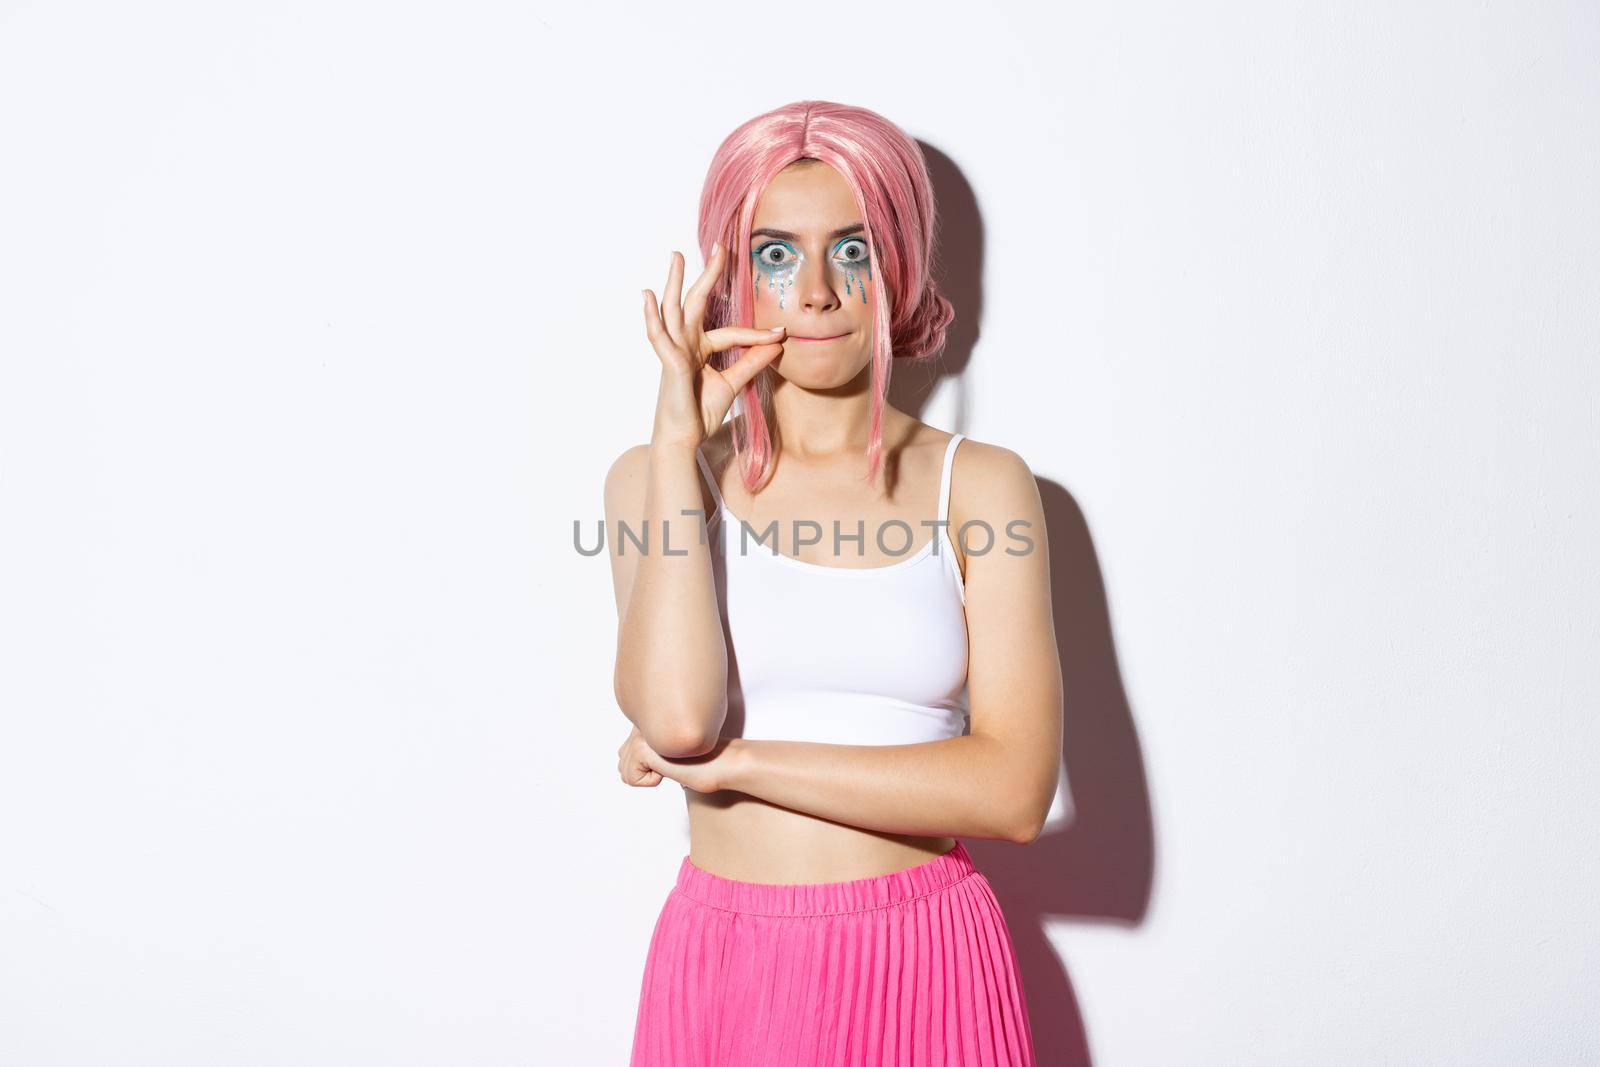 Image of funny party girl in pink wig and halloween makeup, making serious face while making seal on lips, zipping mouth as promise to keep secret, standing over white background.